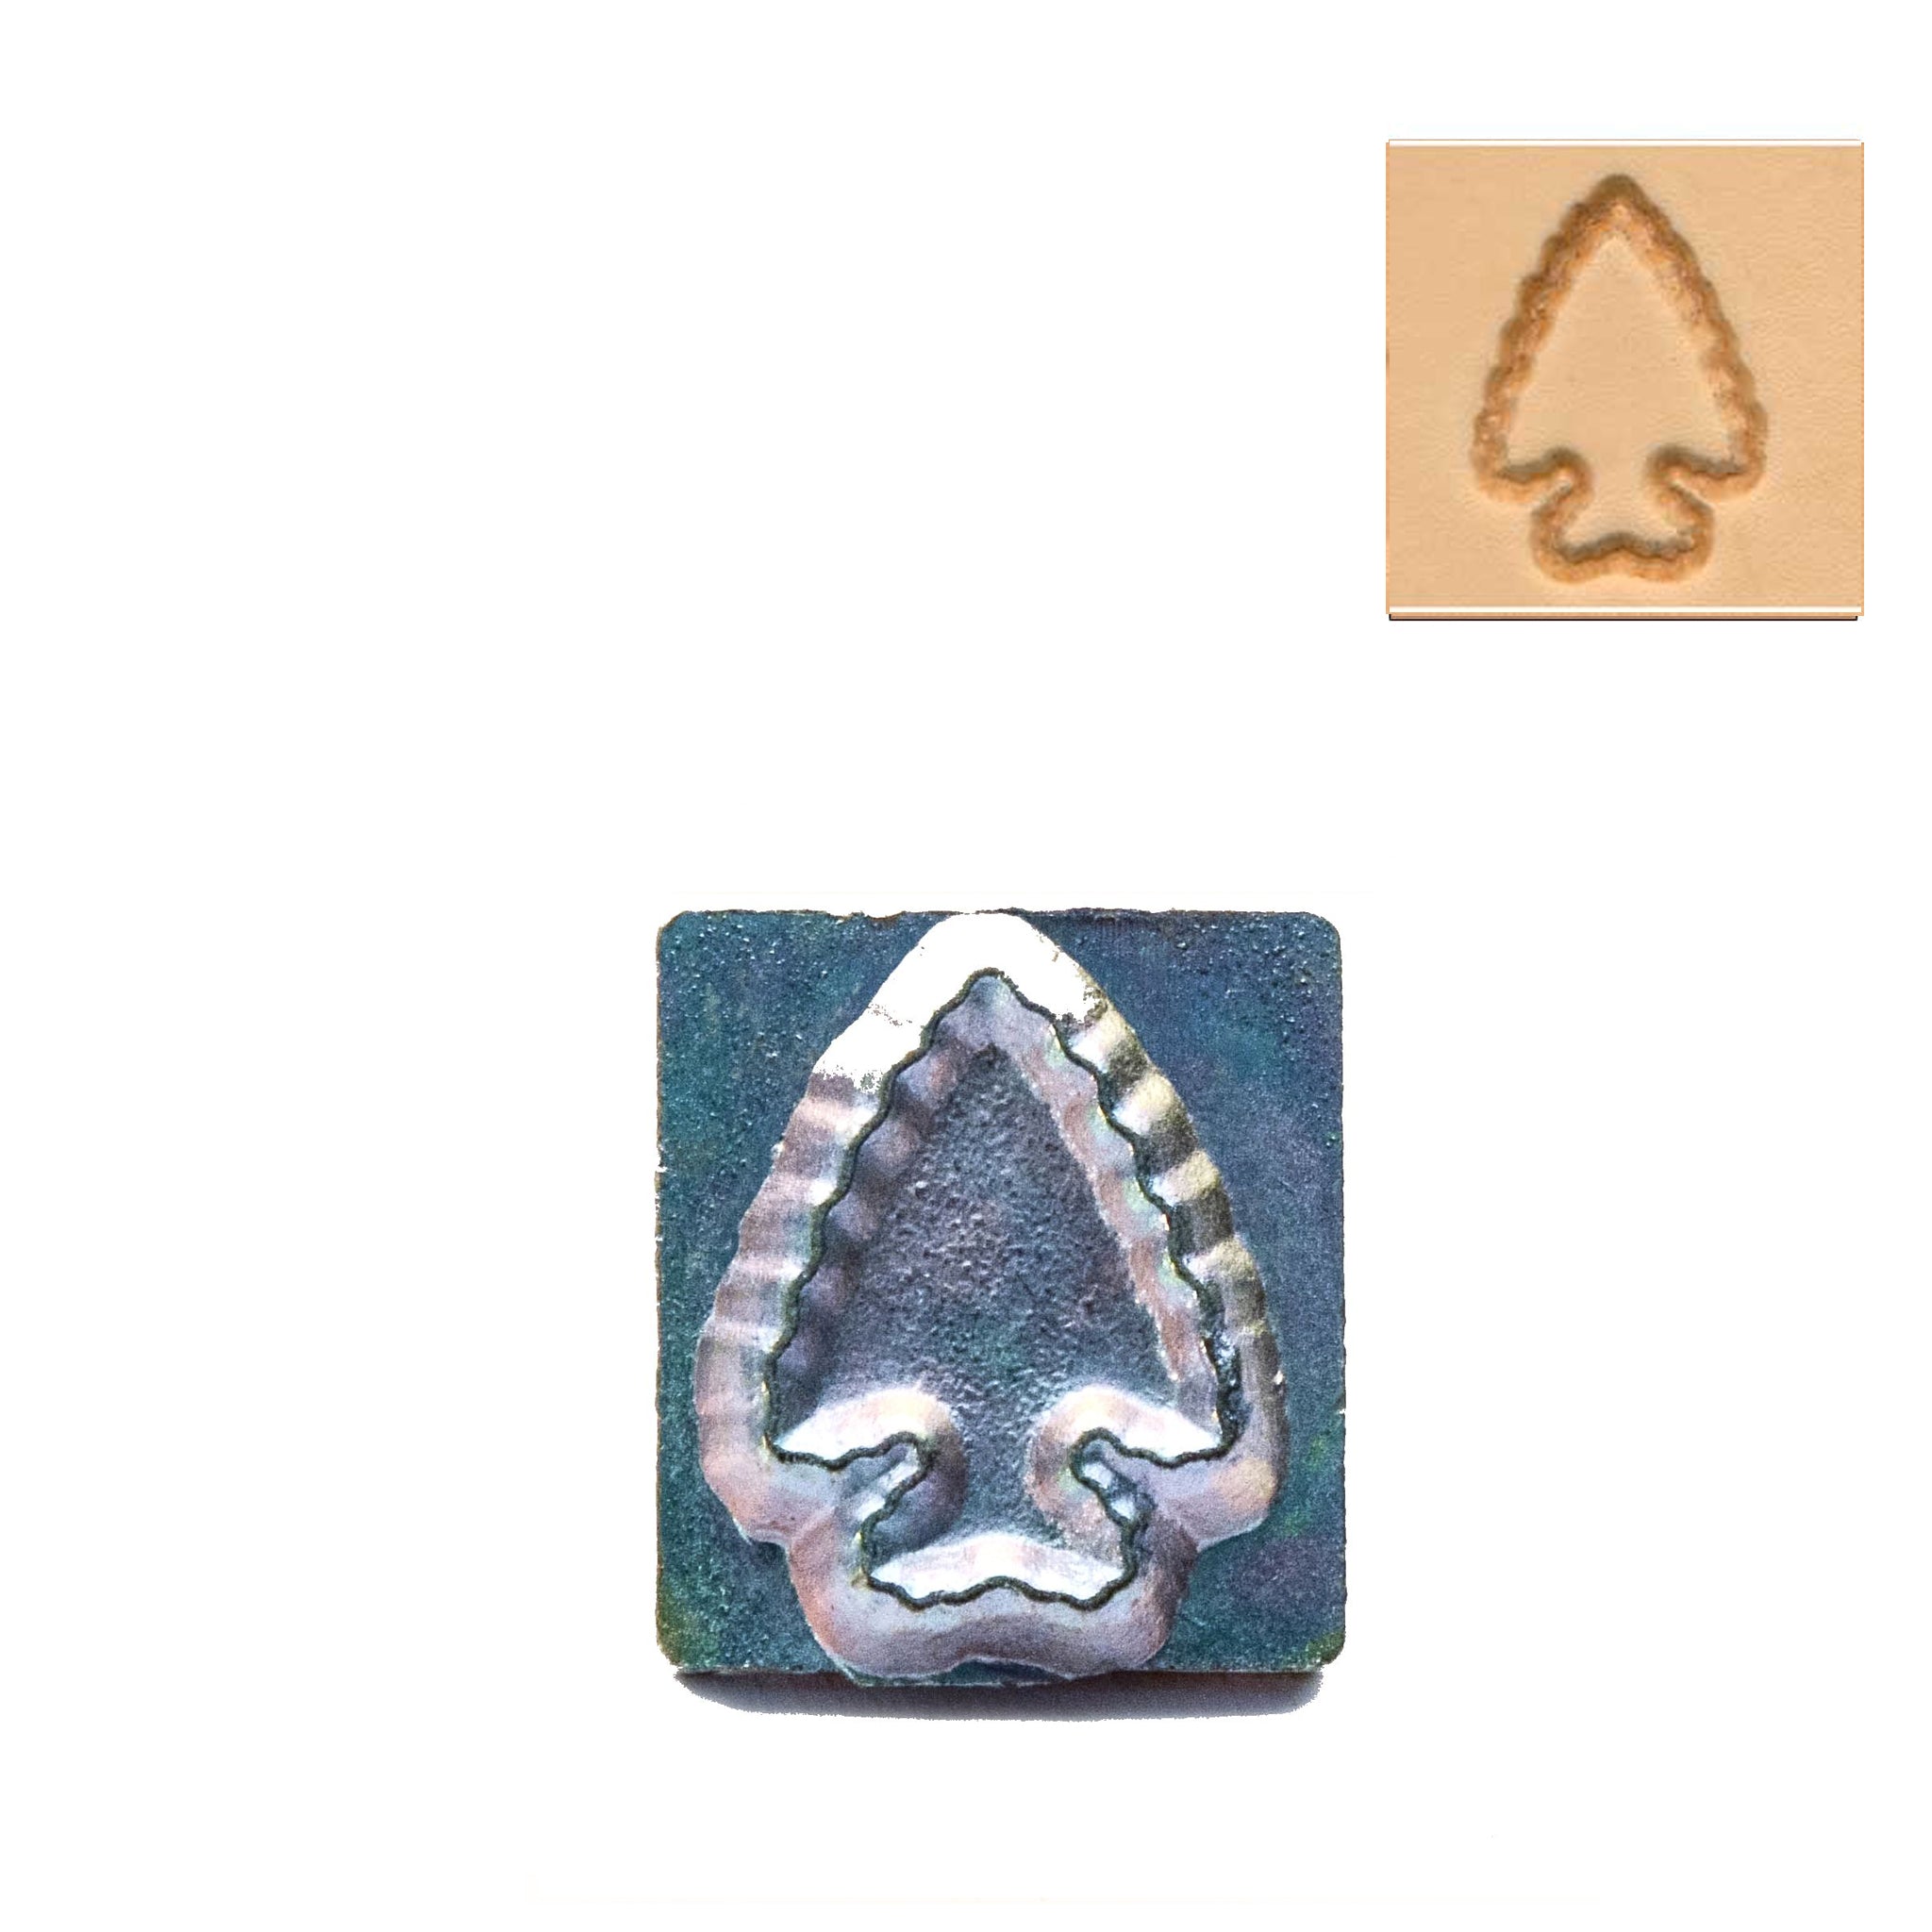 Arrow Head 3D Embossing Stamp from Identity Leathercraft